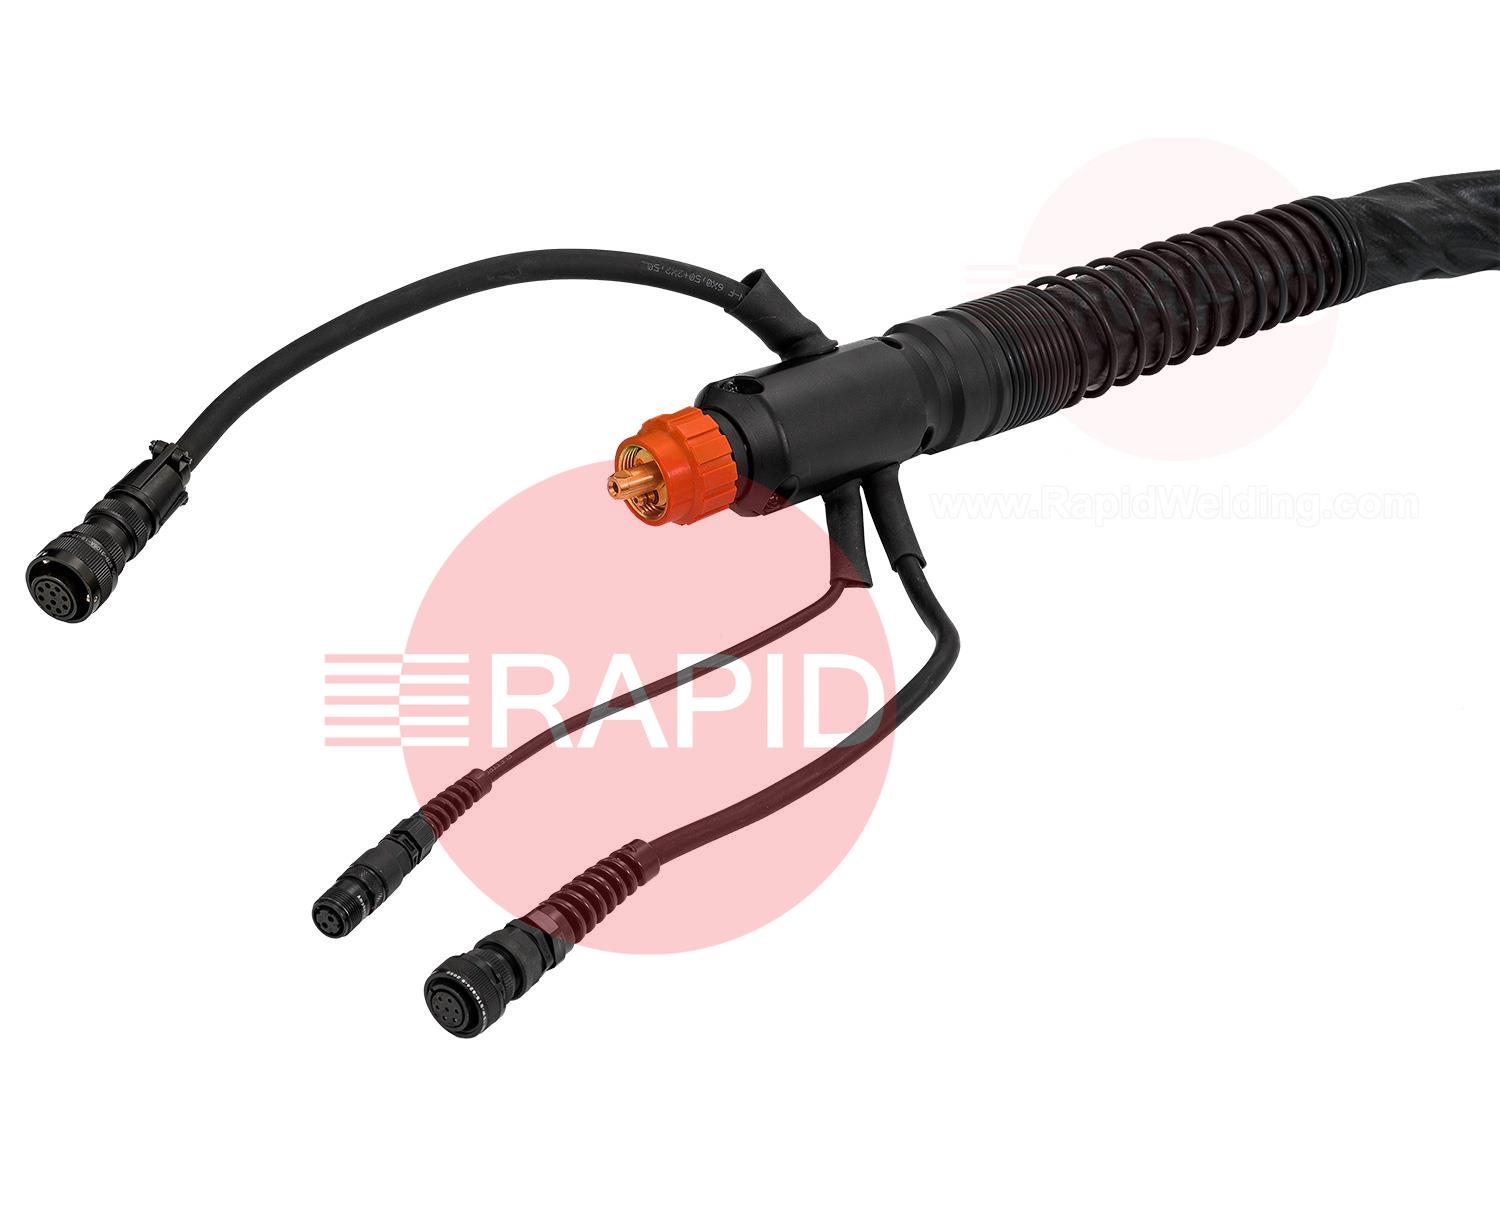 SGTXG205CBL  Kemppi Supersnake GTX Air Cooled Interconnection Cable (Std Liner FE 1.0-1.6mm) - 20m / 50mm2